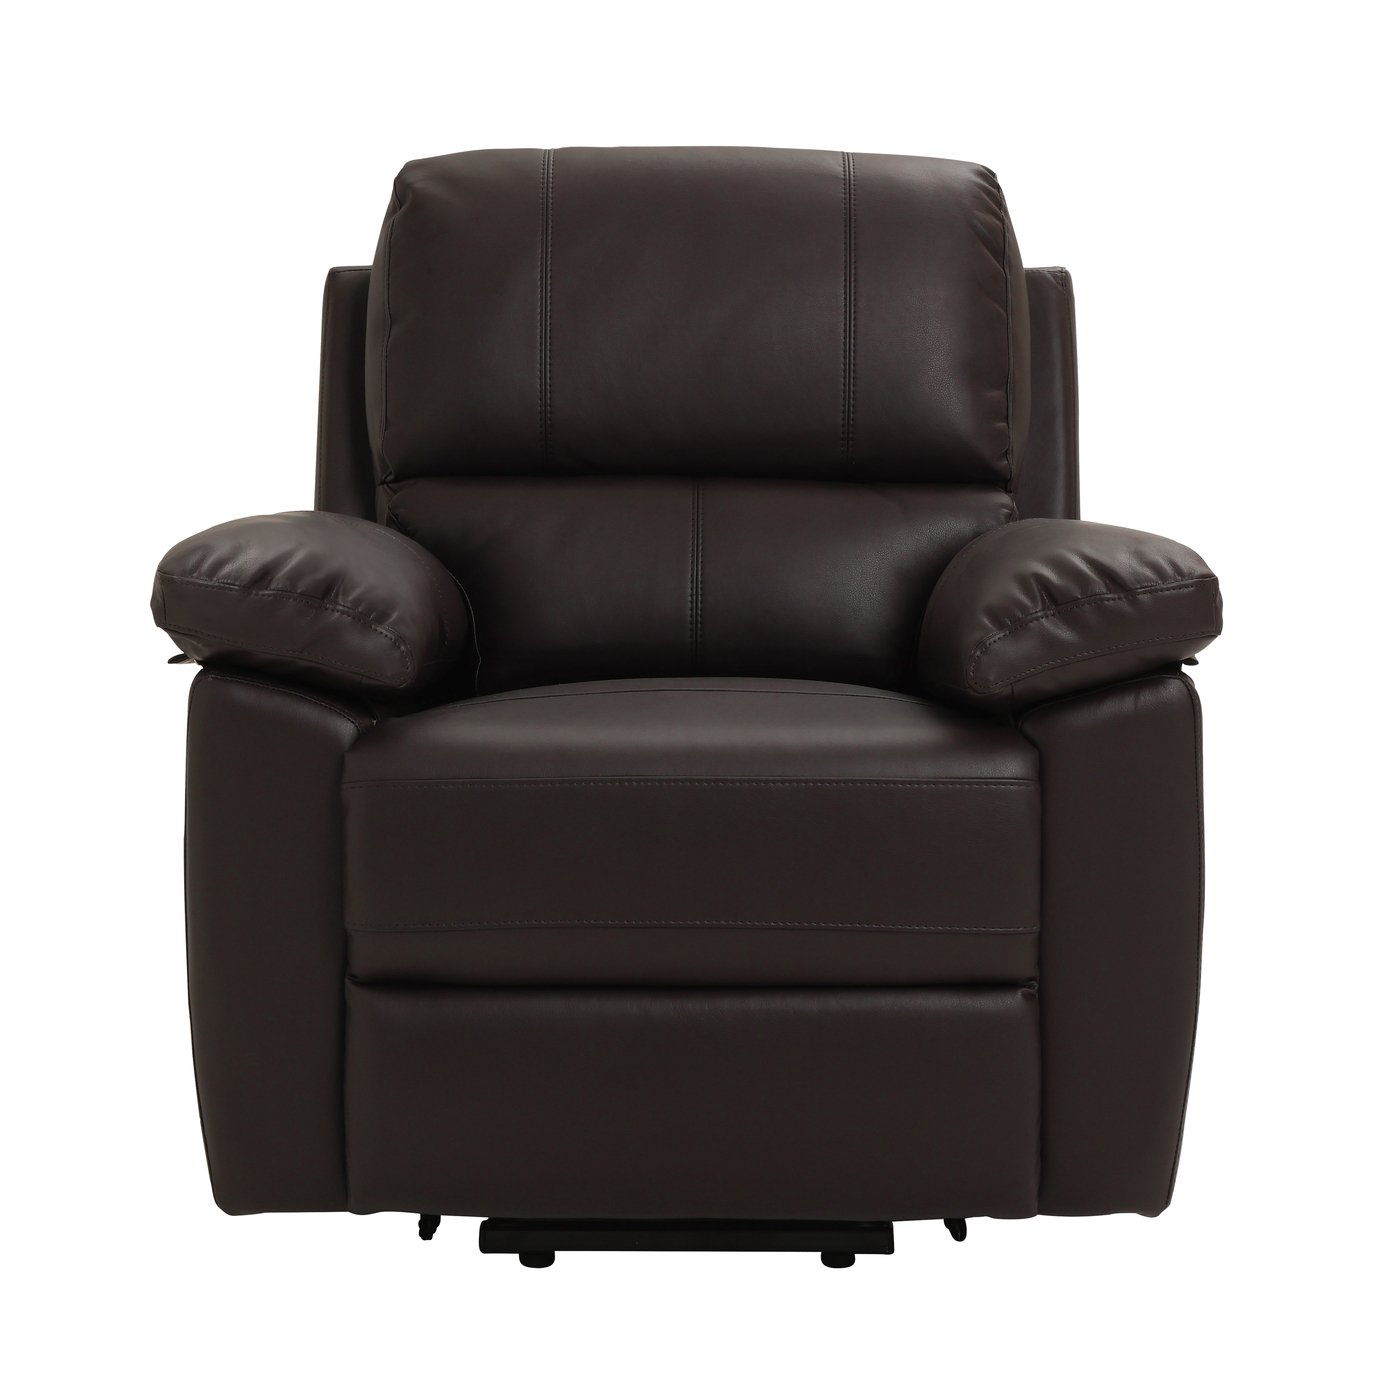 Argos Home Toby Faux Leather Rise & Recline Chair -Chocolate